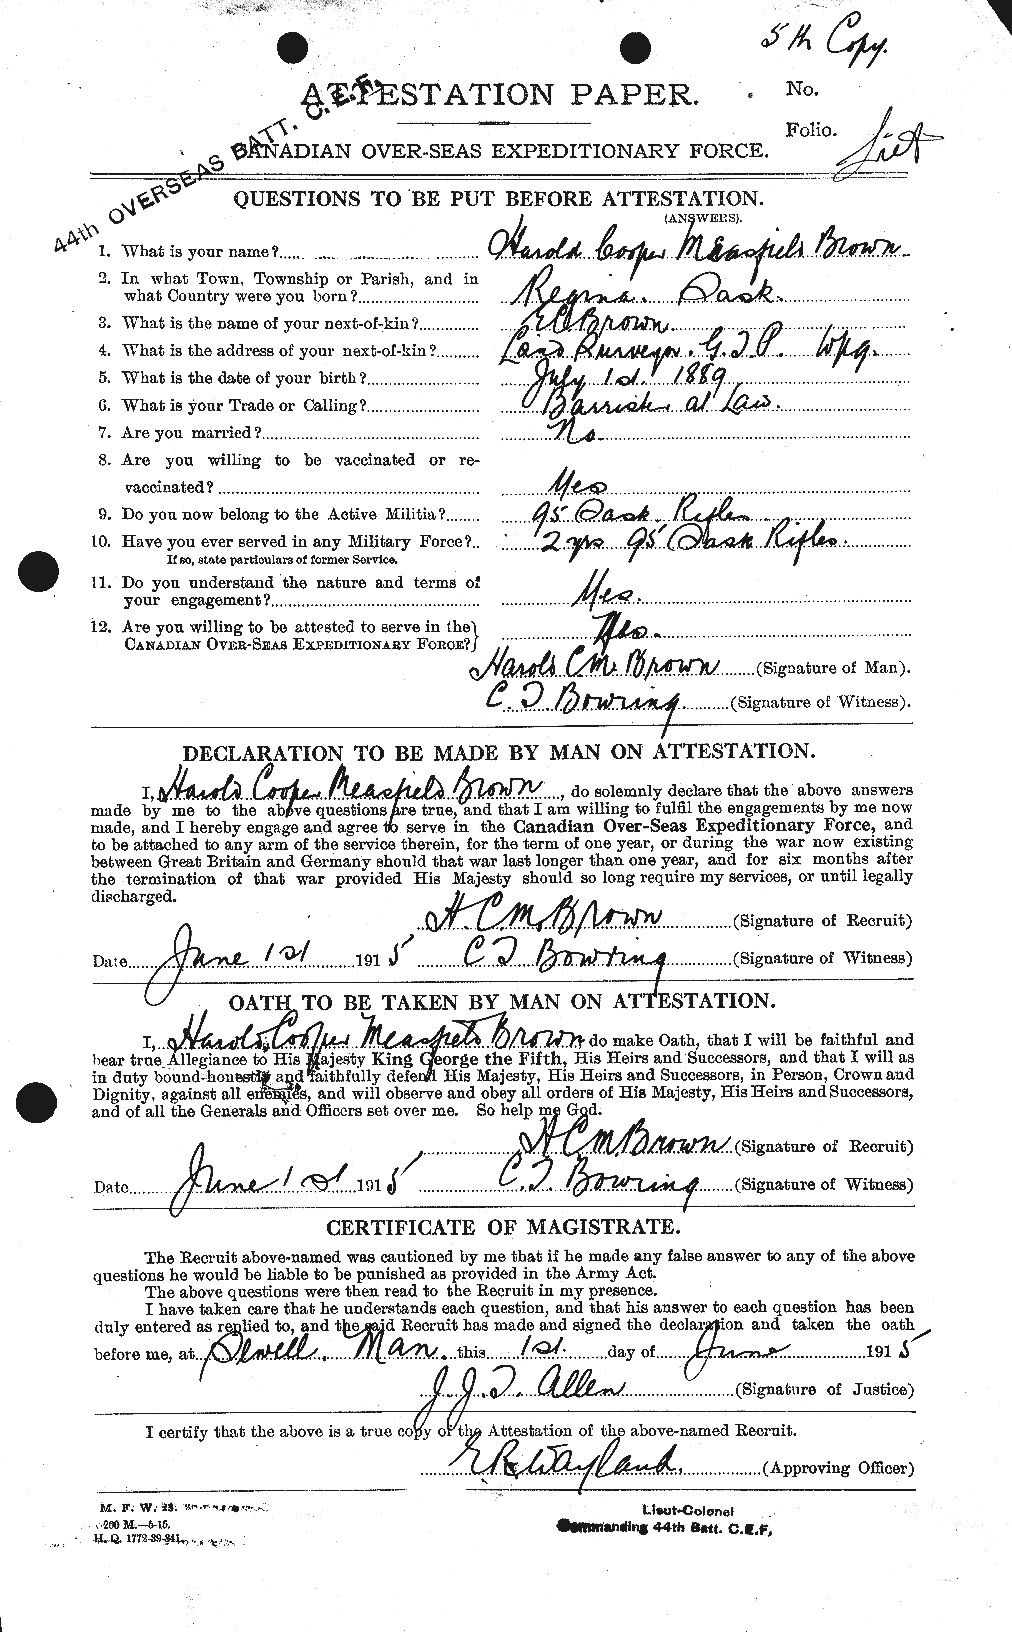 Personnel Records of the First World War - CEF 265351a